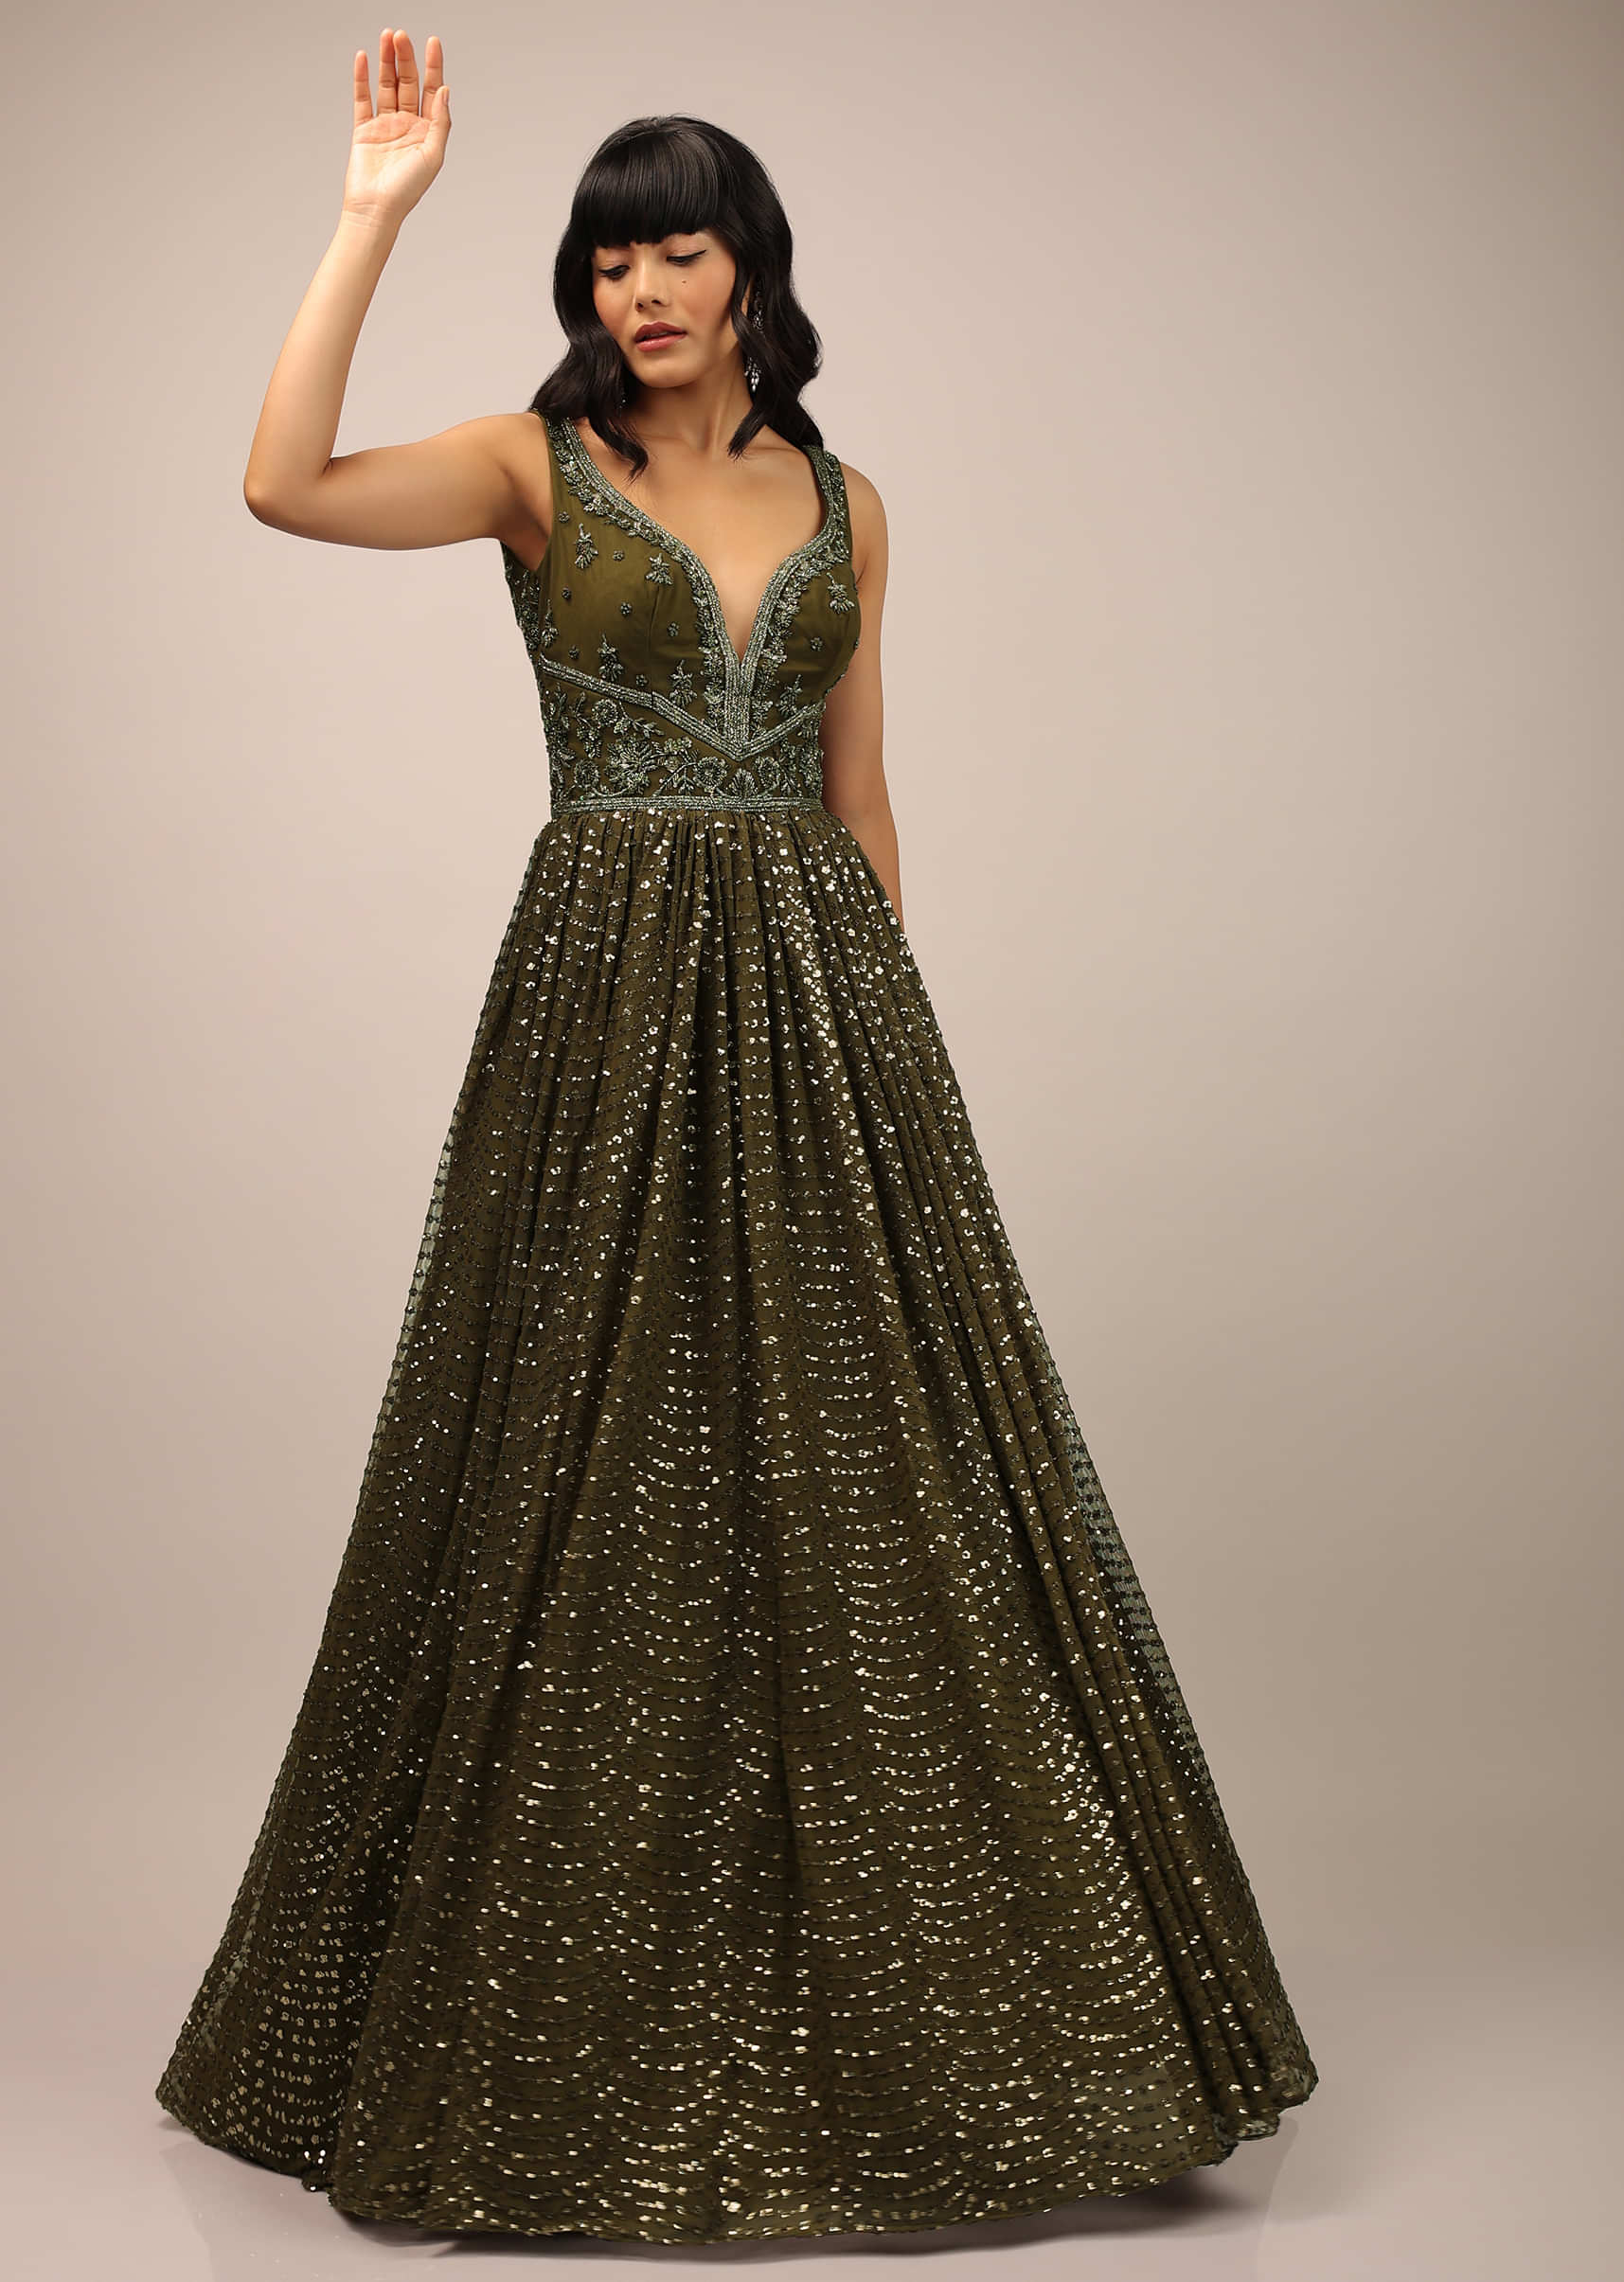 Military Olive Gown With Sequins And A Low Cut On The Back